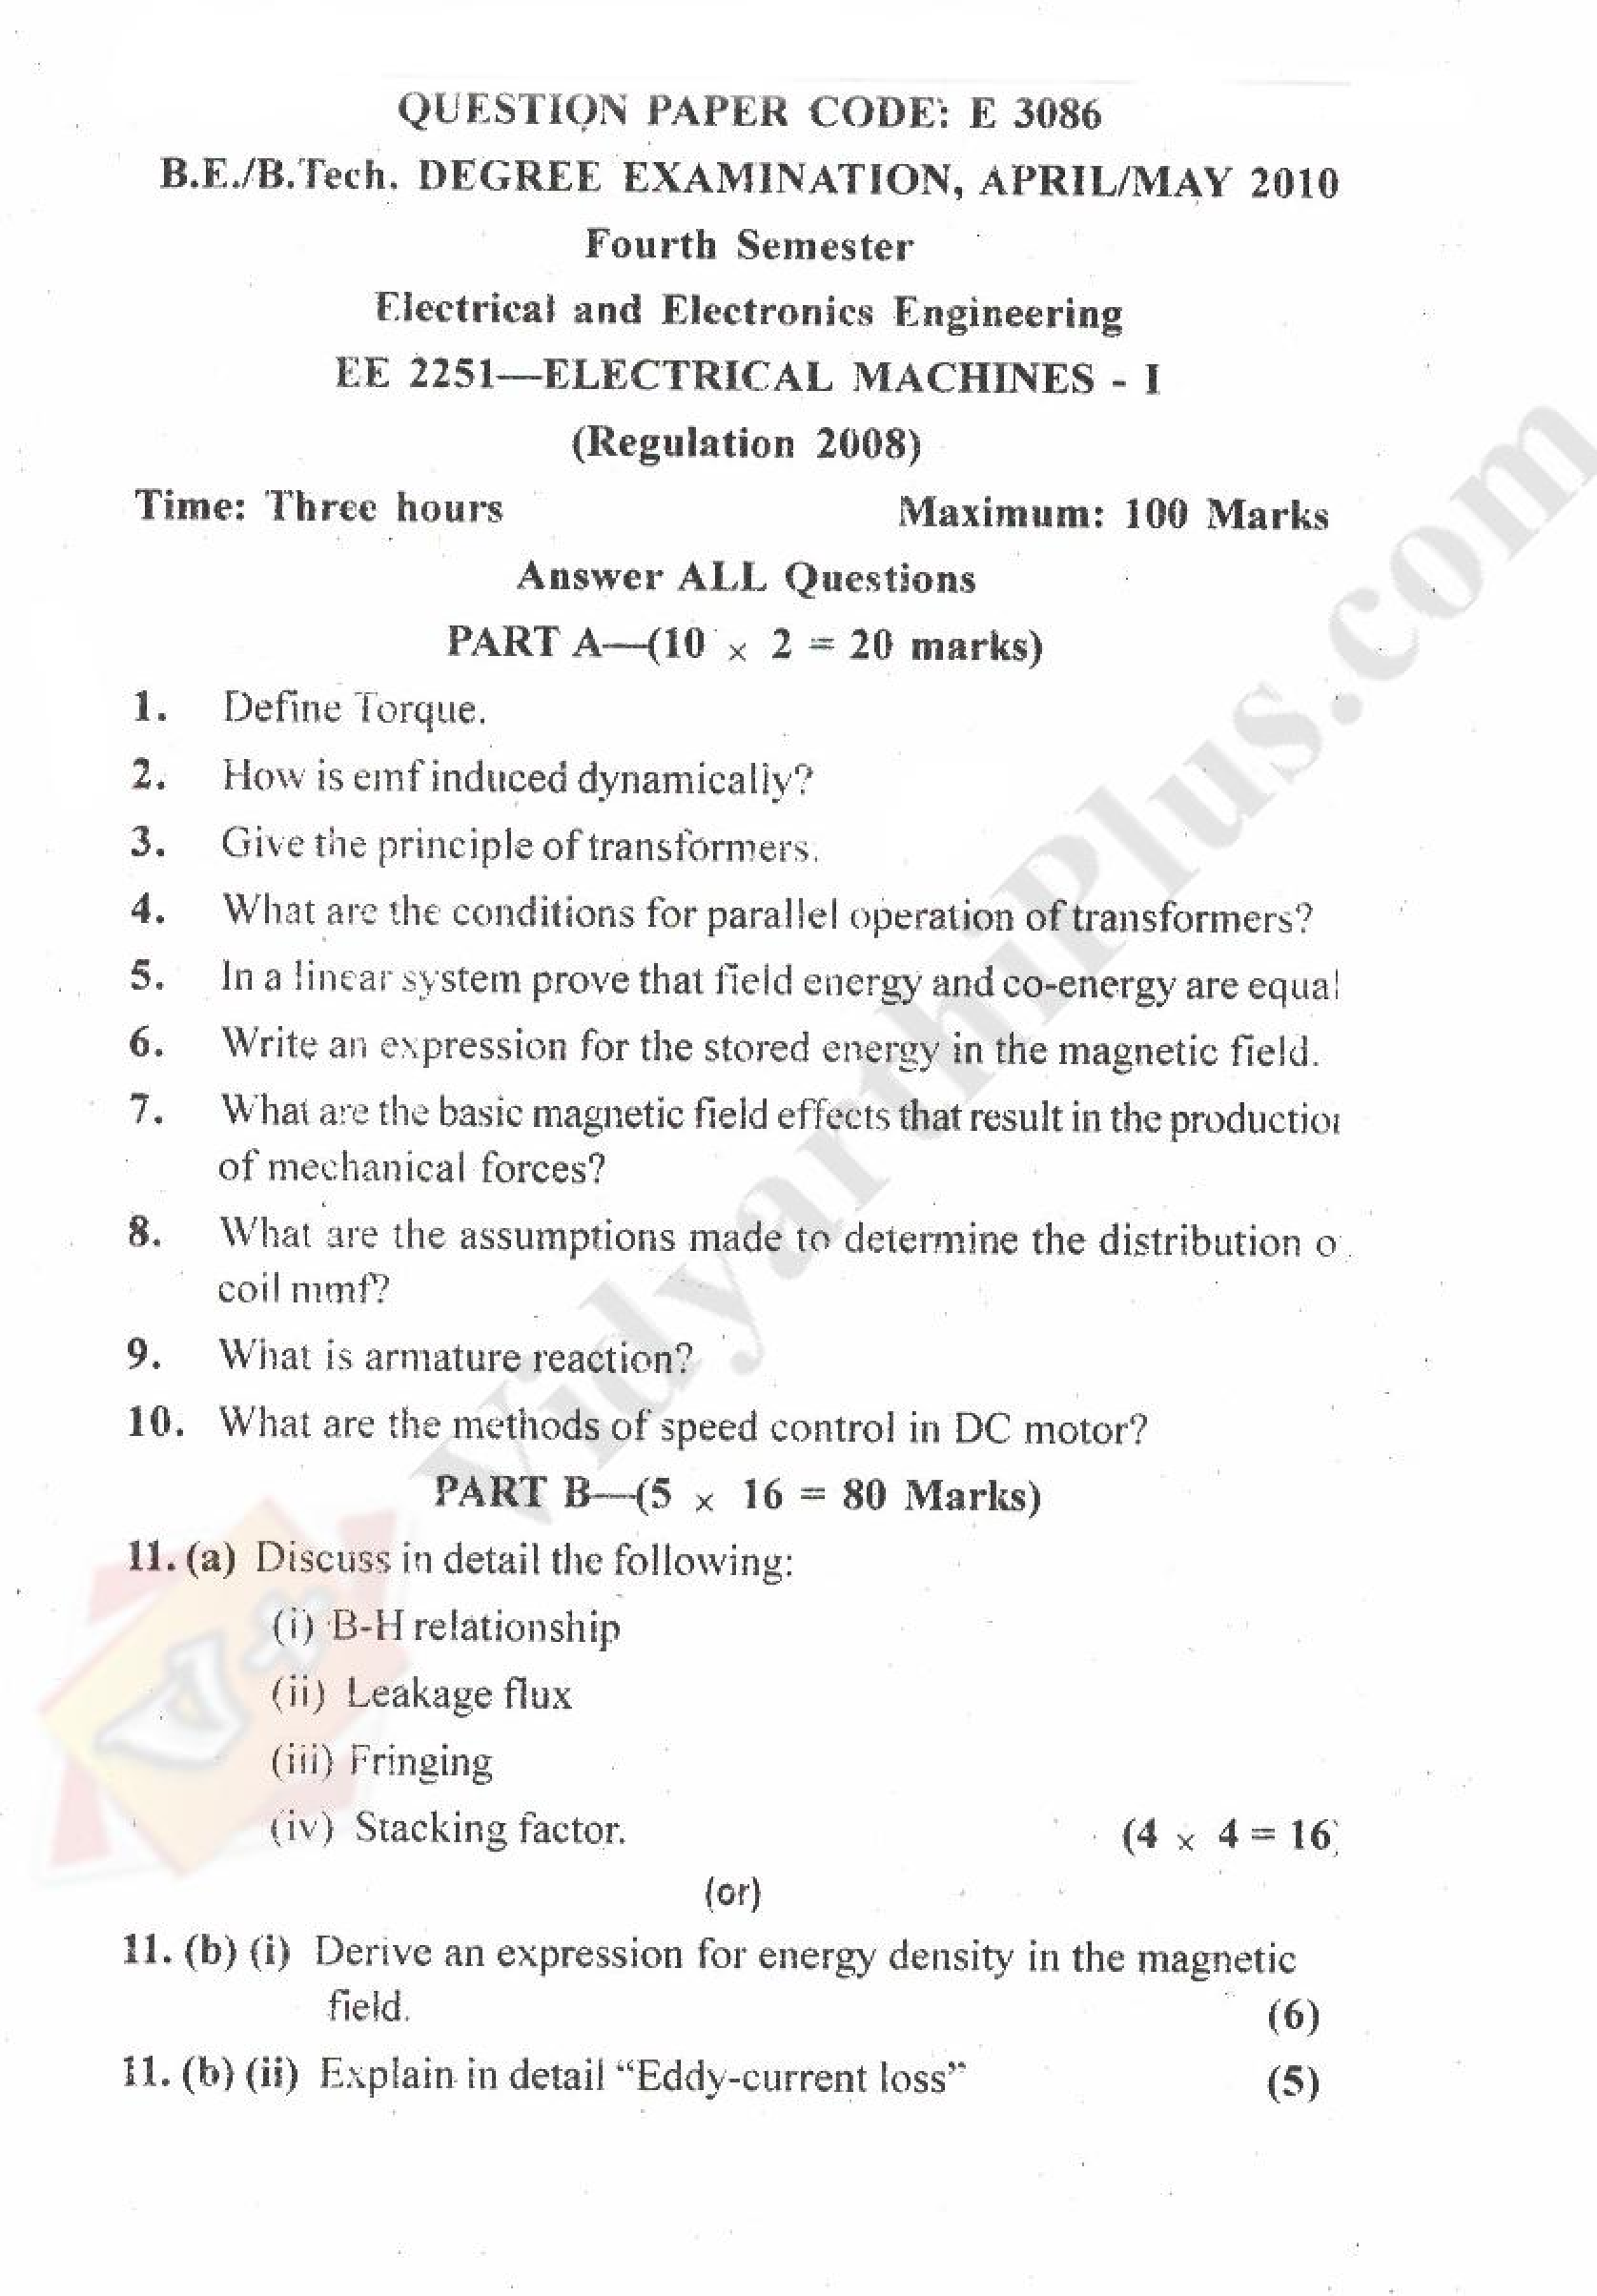 Electrical Machines - I Solved Question Papers - 2015 Edition